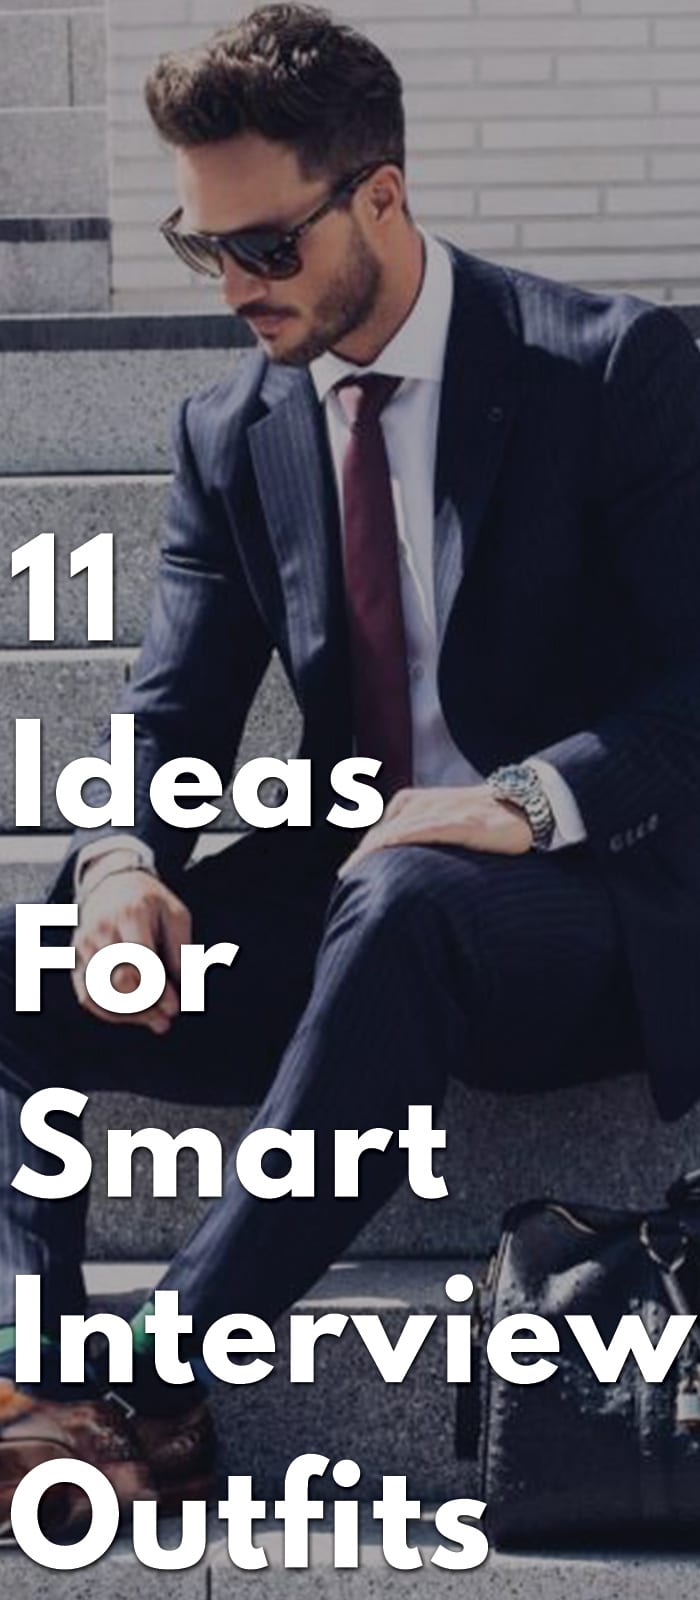 11-Ideas-for-Smart-Interview-Outfits